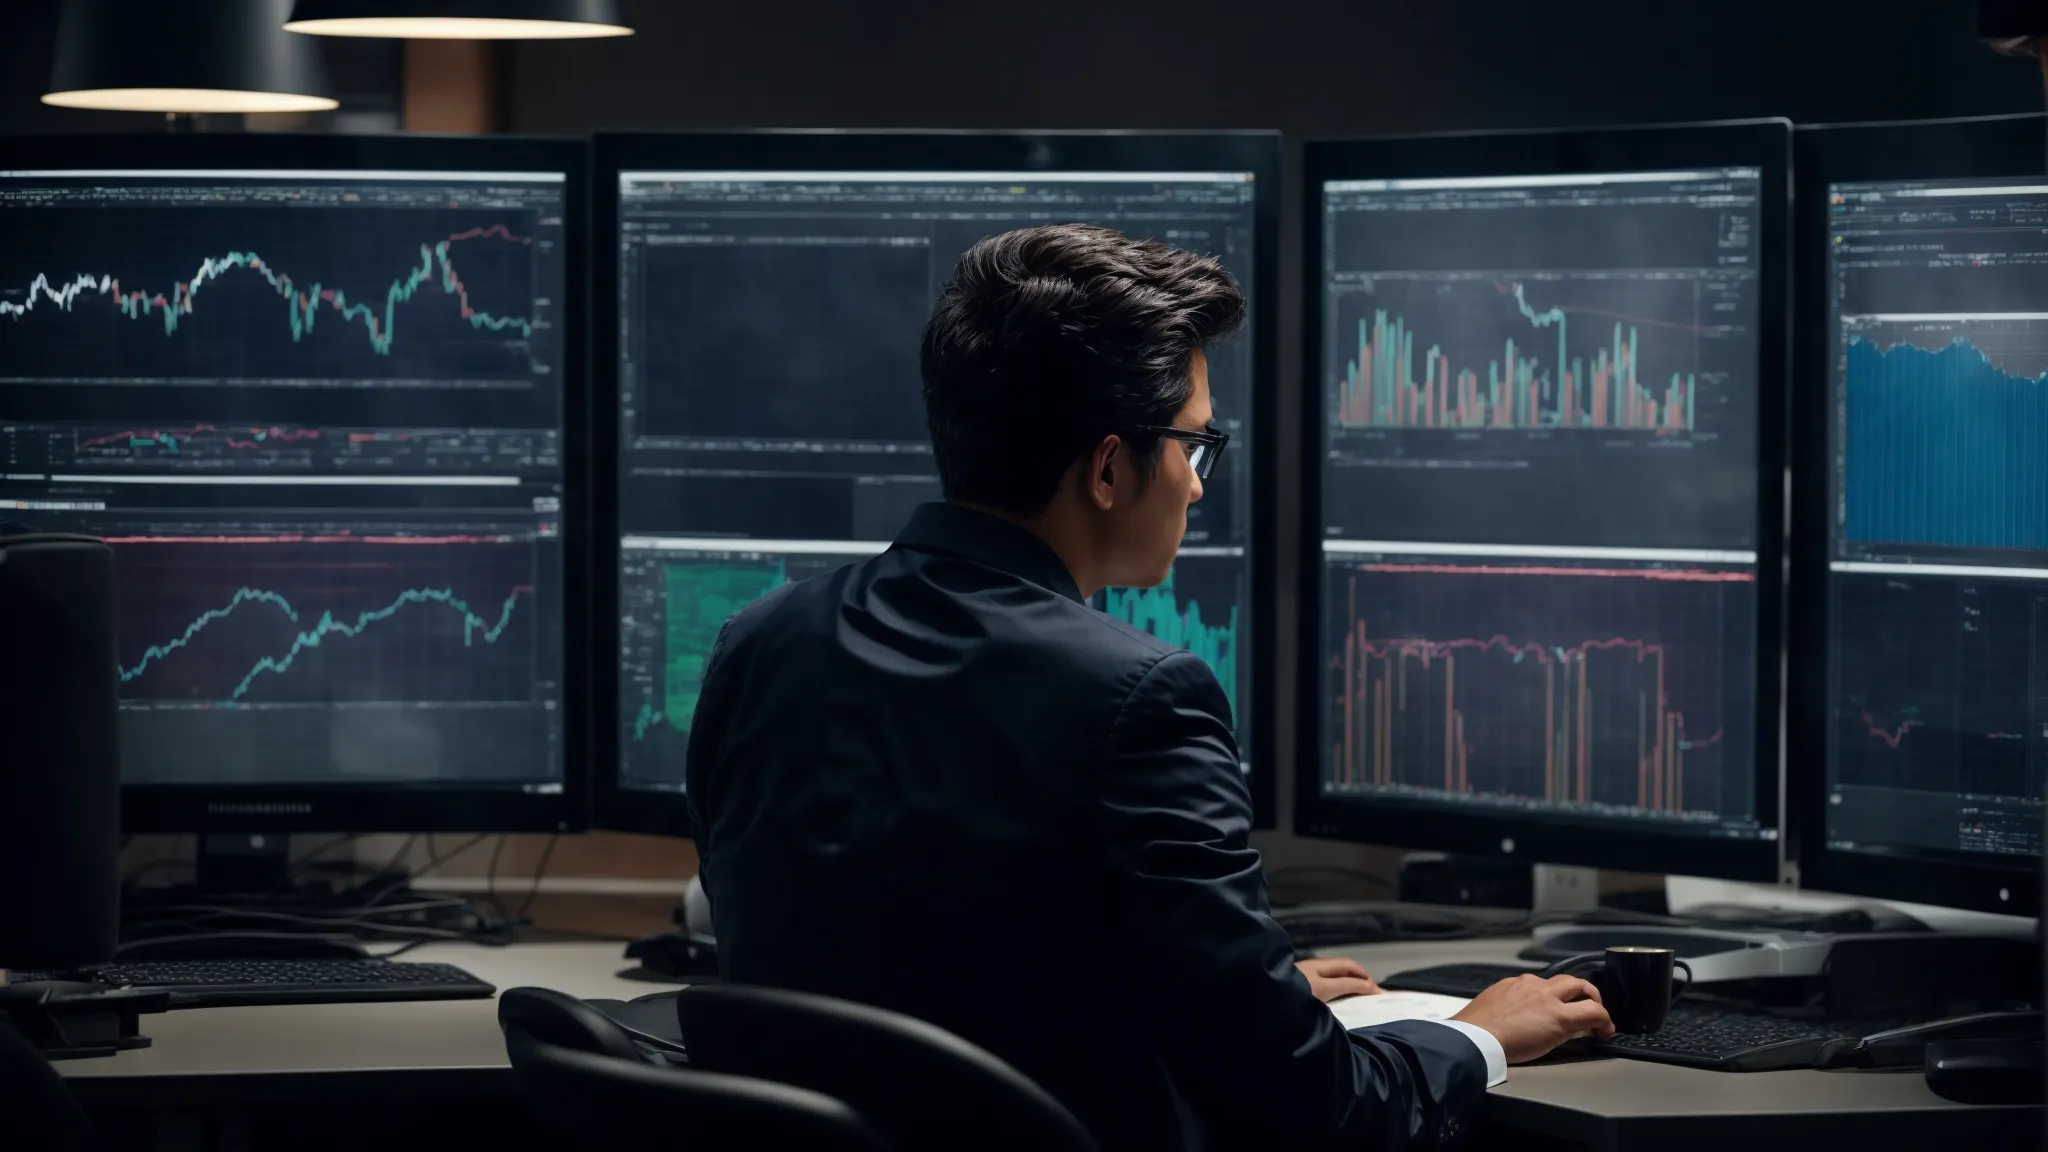 a focused individual analyzing graphs on multiple computer monitors in a technology-driven office environment.